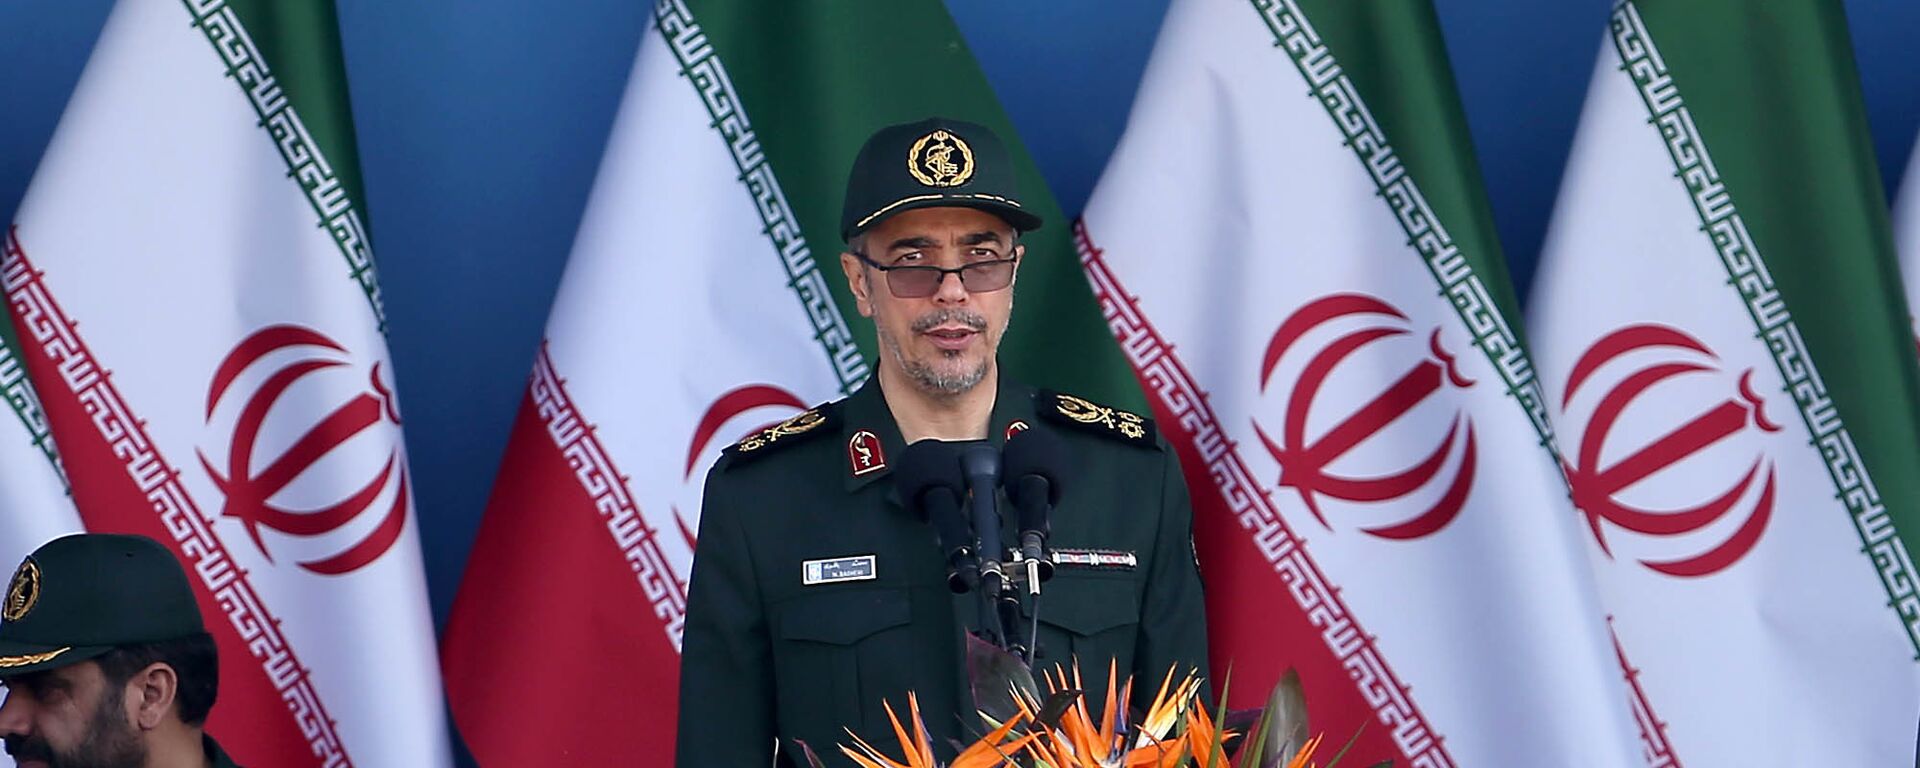 Chief of the General Staff of Iran's Armed Forces, General Mohammad Hossein Bagheri delivers a speech during a military parade marking the 36th anniversary of Iraq's 1980 invasion of Iran, in front of the shrine of late revolutionary founder Ayatollah Khomeini, just outside Tehran, Iran, Wednesday, Sept. 21, 2016 - Sputnik International, 1920, 24.10.2022